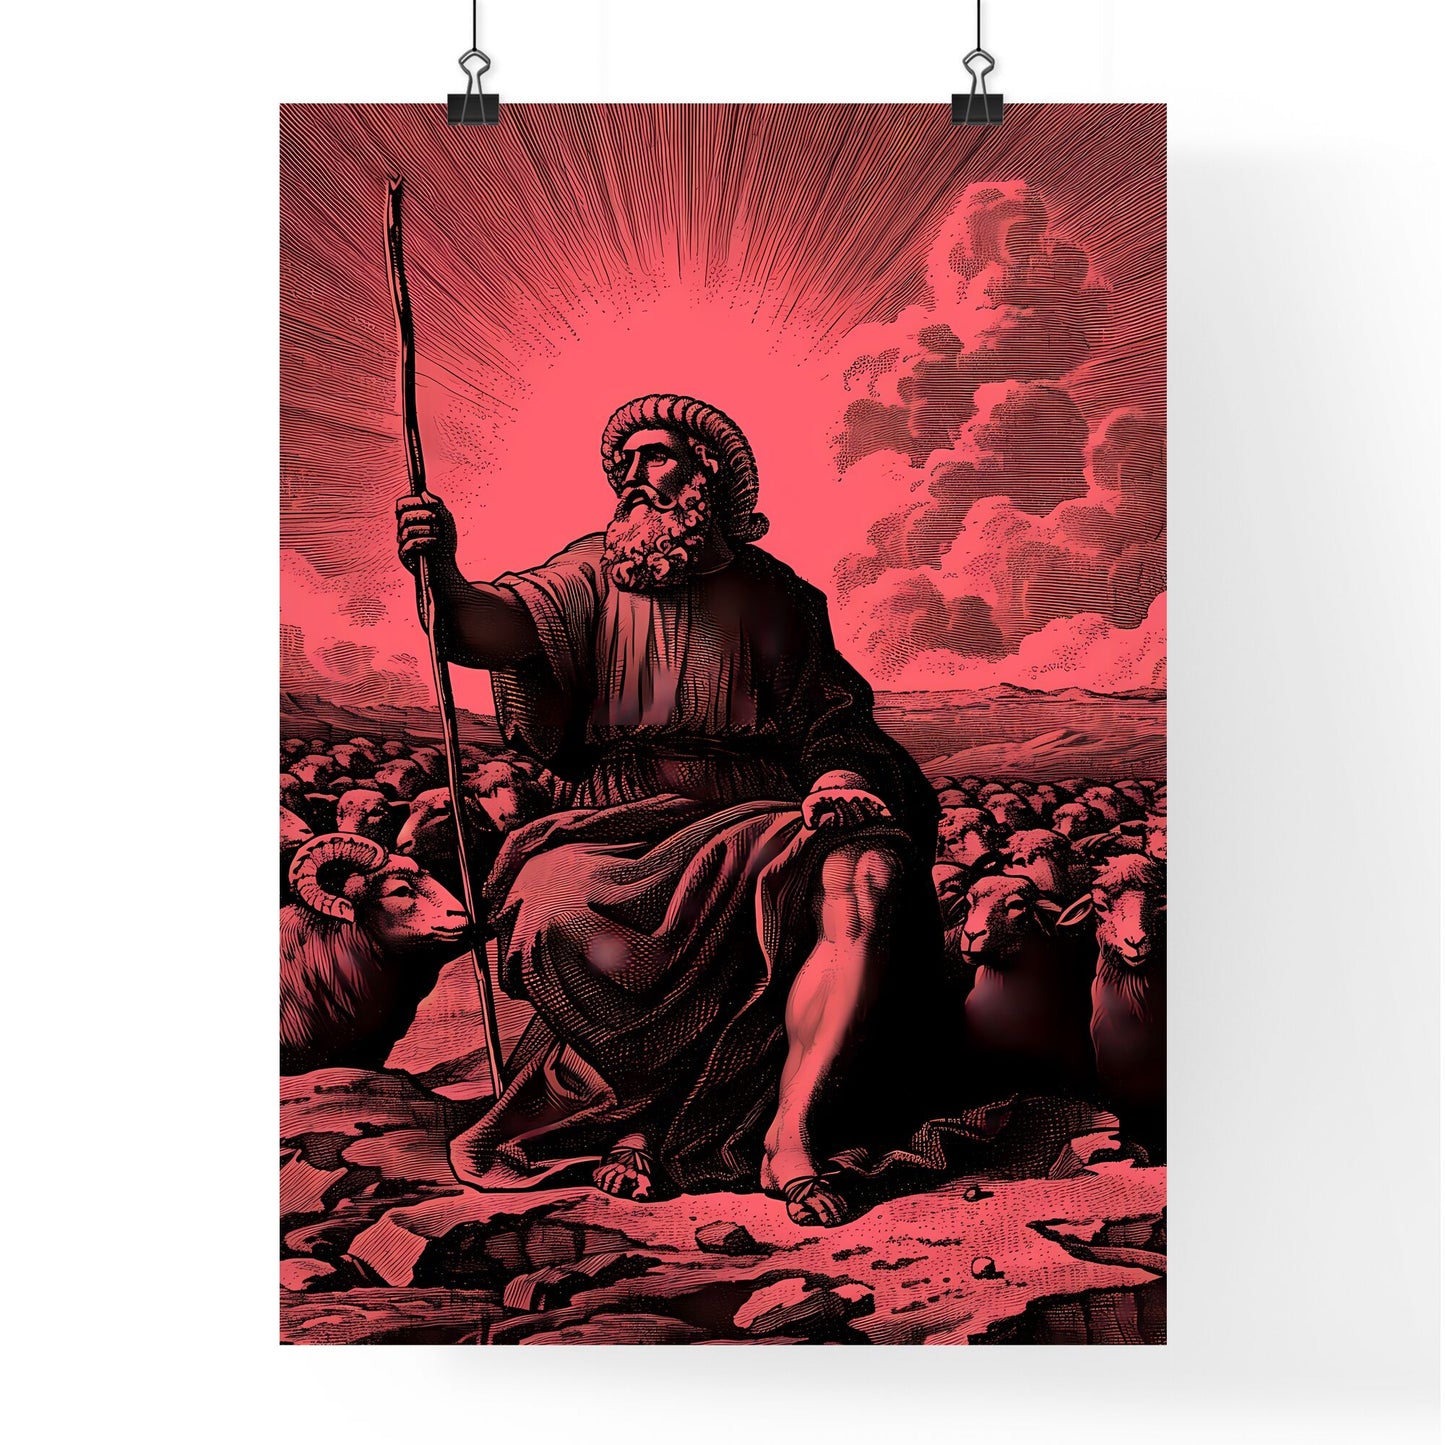 Moses prophet of God herding the flock in the desert, looking up at the sky - Art print of a man with a beard and a staff and sheep Default Title